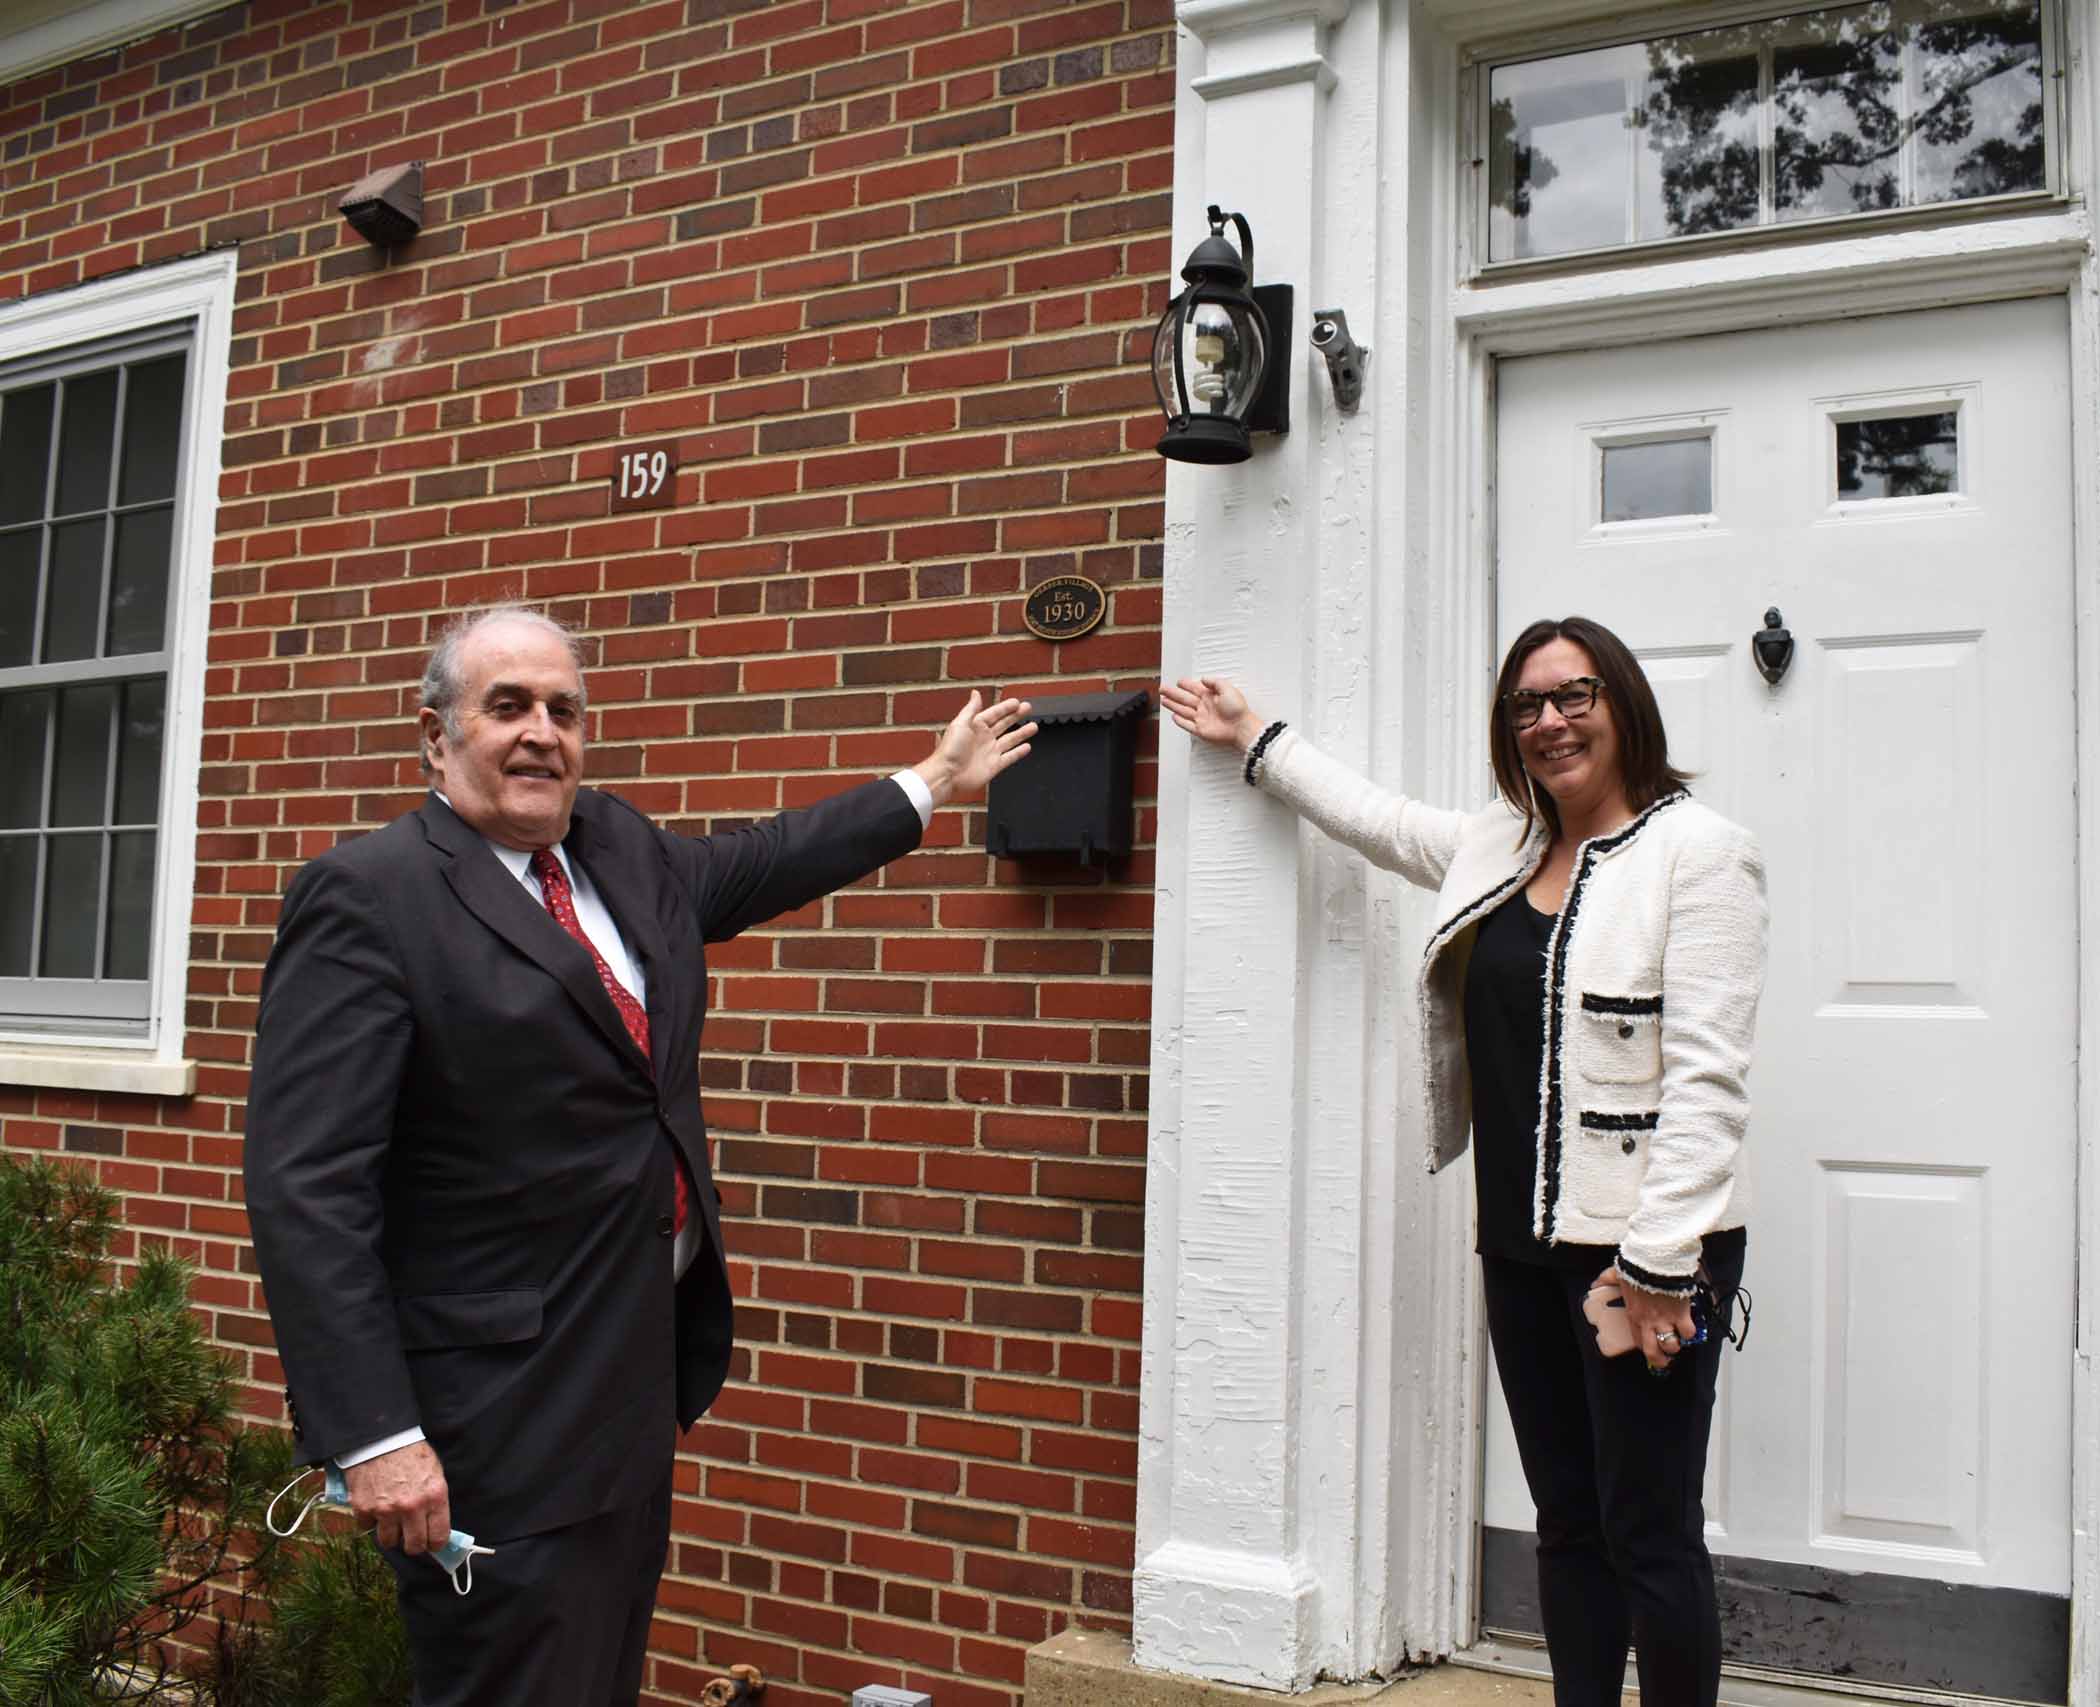 Hon. Alex Beehler, Assistant Secretary of the Army for Installations, Energy, and Environment and ACHP Chairman Aimee Jorjani at an Inter-War Era home on Fort Belvoir, Virginia